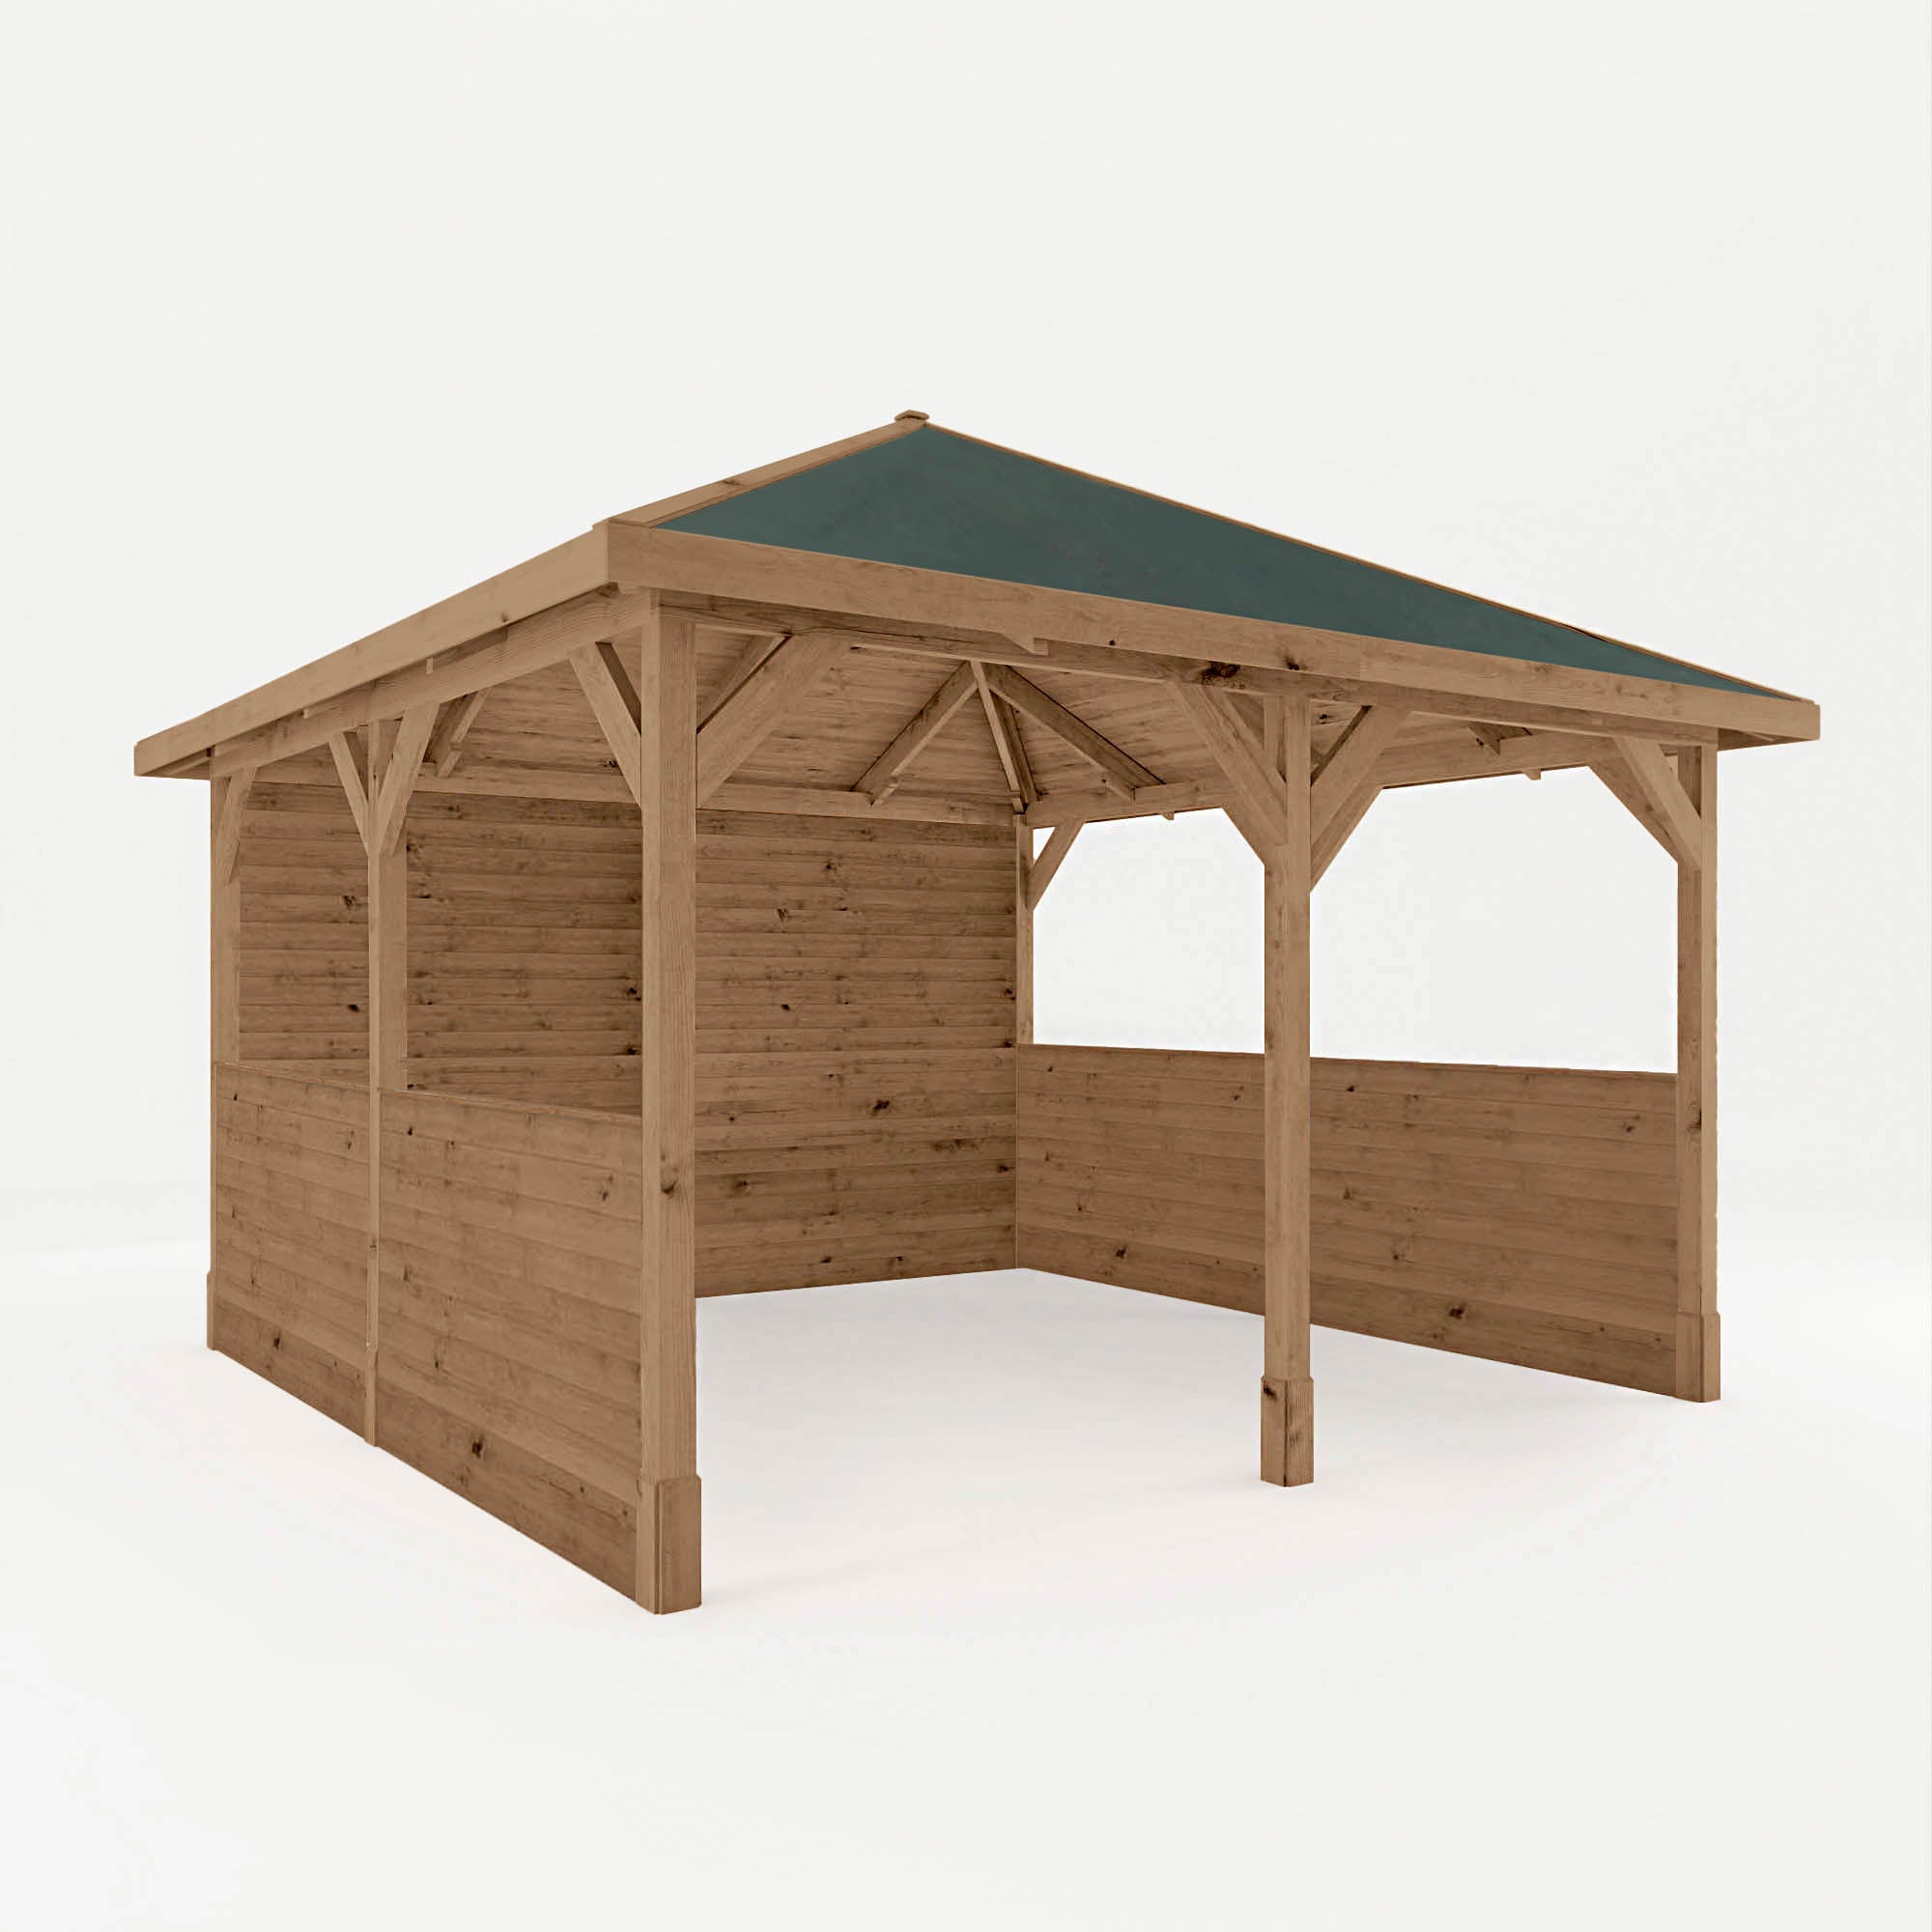 4m x 4m Pressure Treated Gazebo with Roof and Boarded Panels